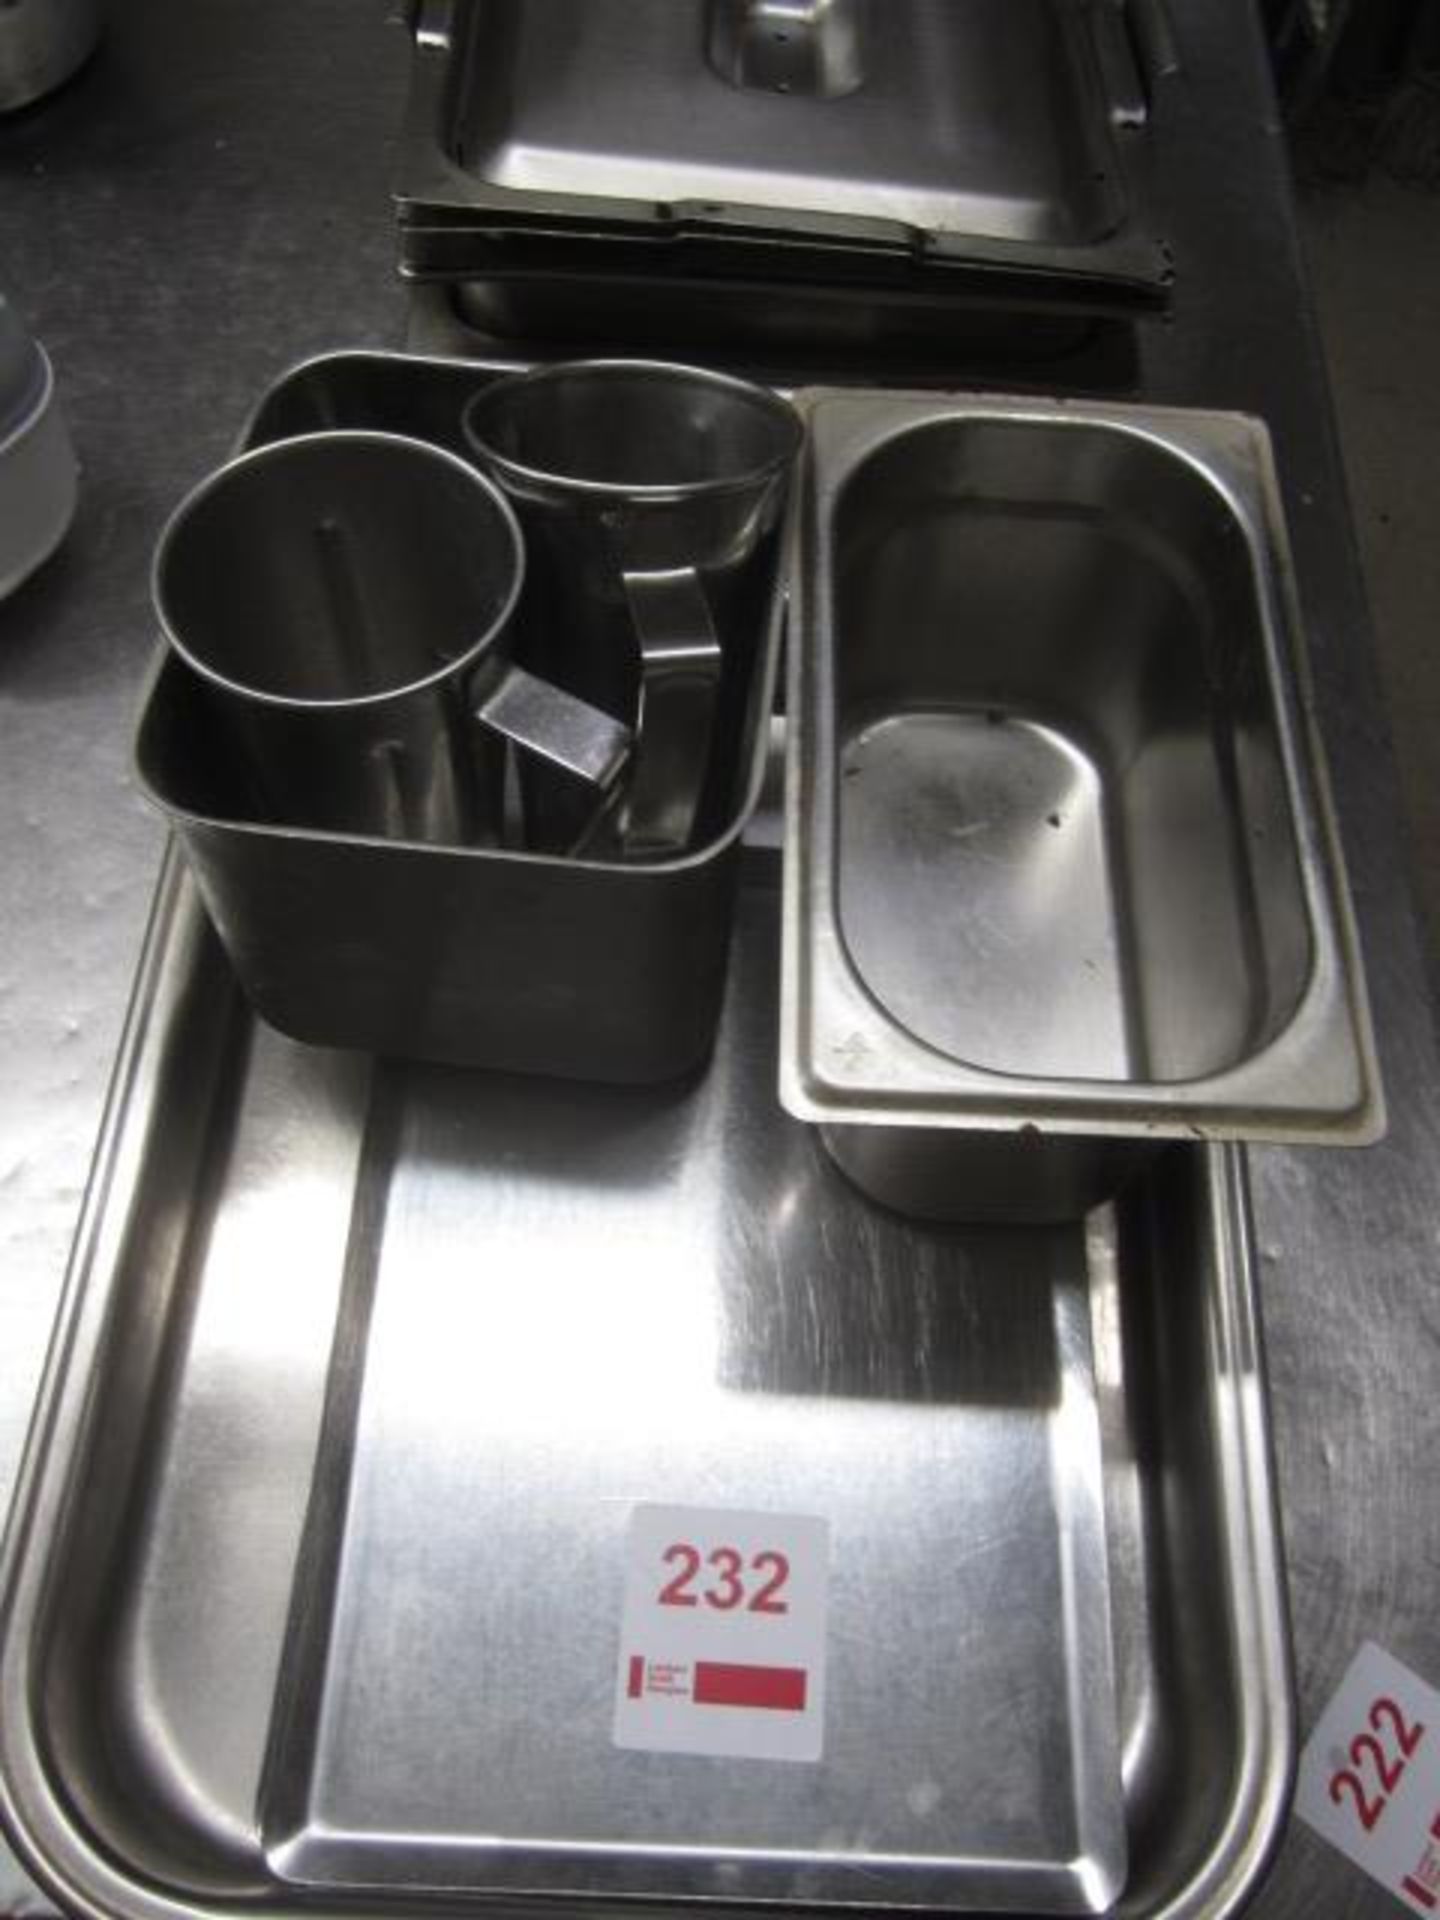 Assorted stainless Steel trays, pots etc., as lotted **Located: Puddy Mark Café, High Street, - Image 2 of 3